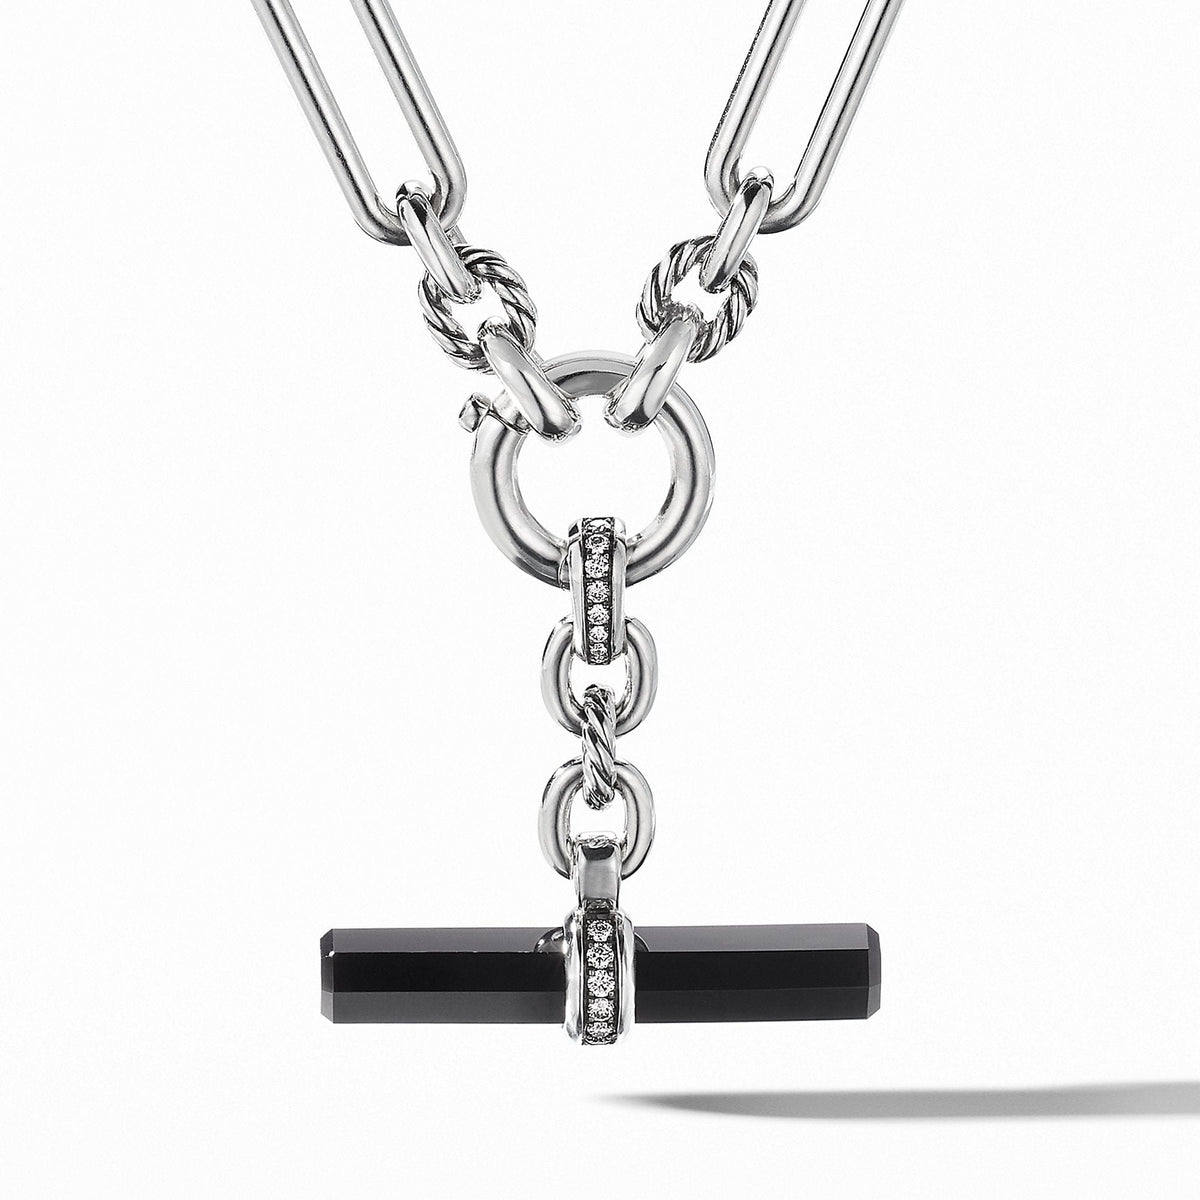 Lexington Chain Link Necklace with Black Onyx and Diamonds